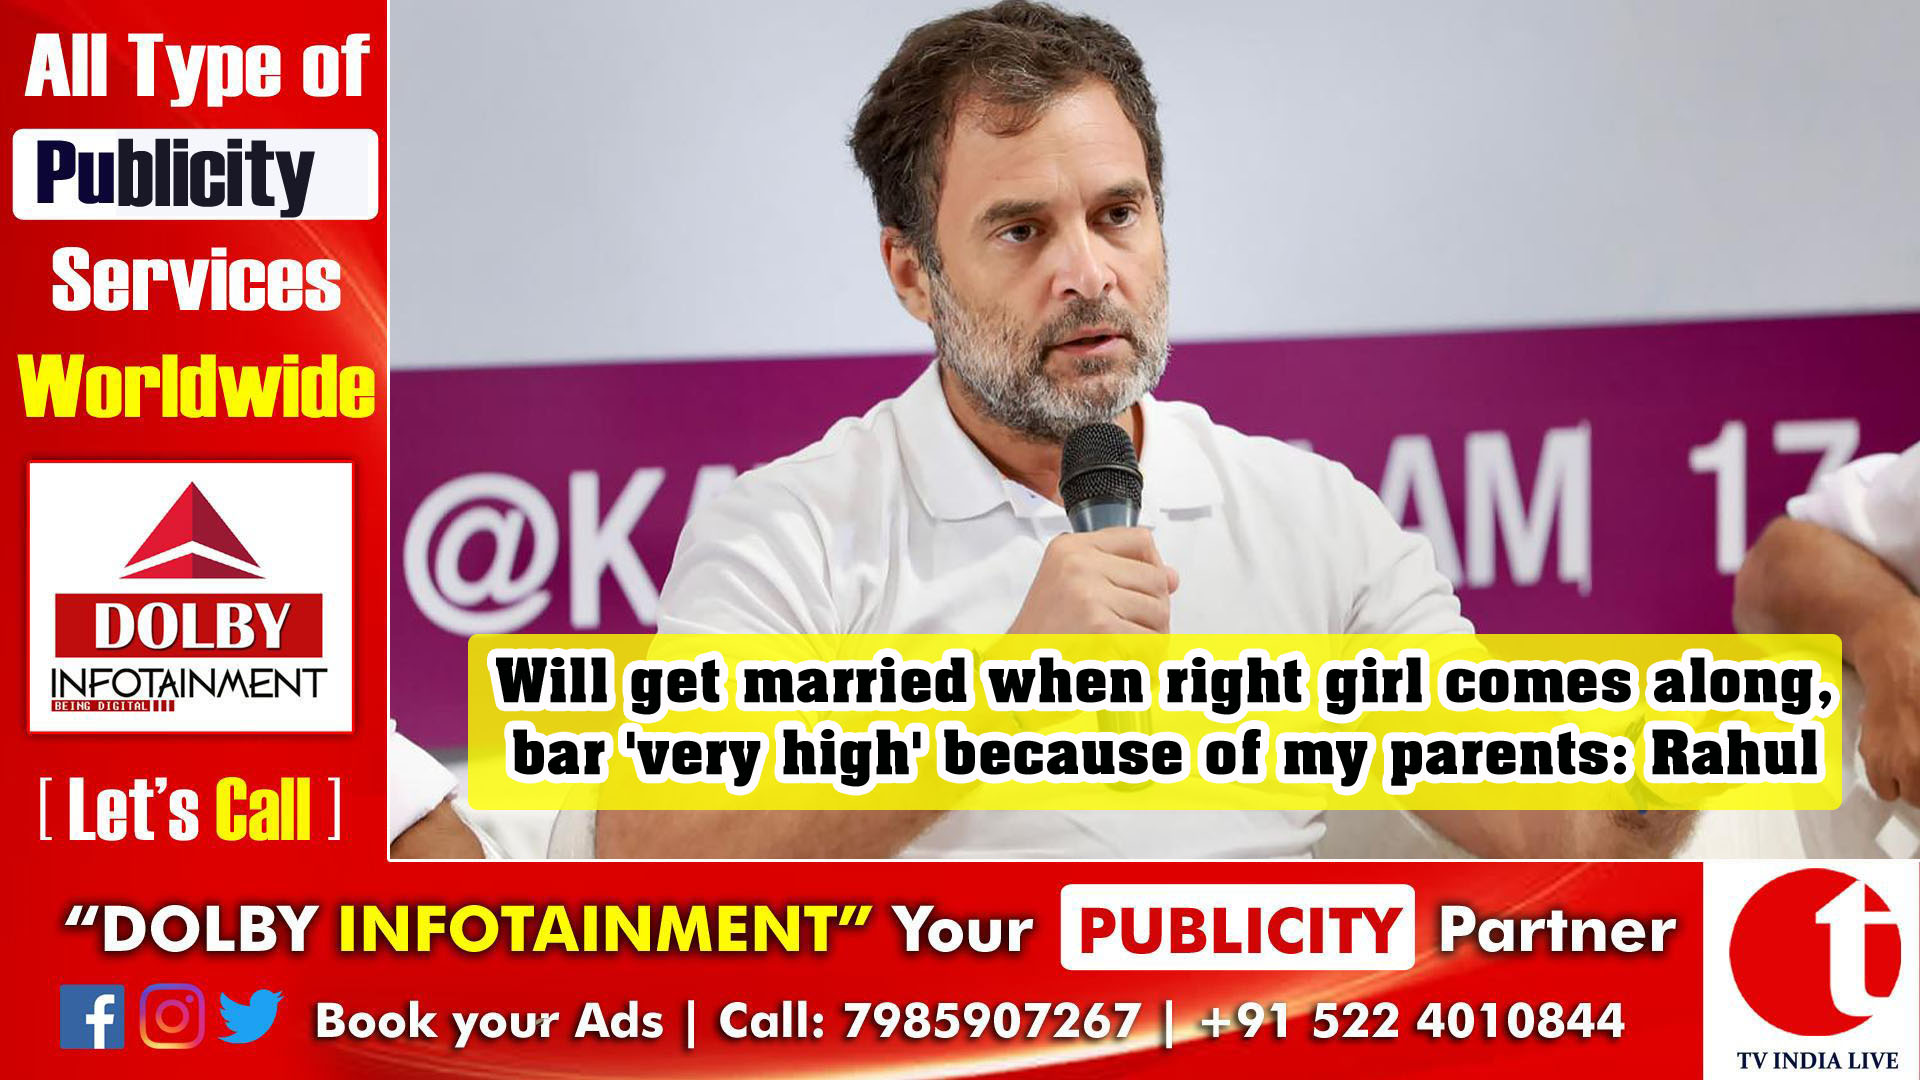 Will get married when right girl comes along, bar 'very high' because of my parents: Rahul